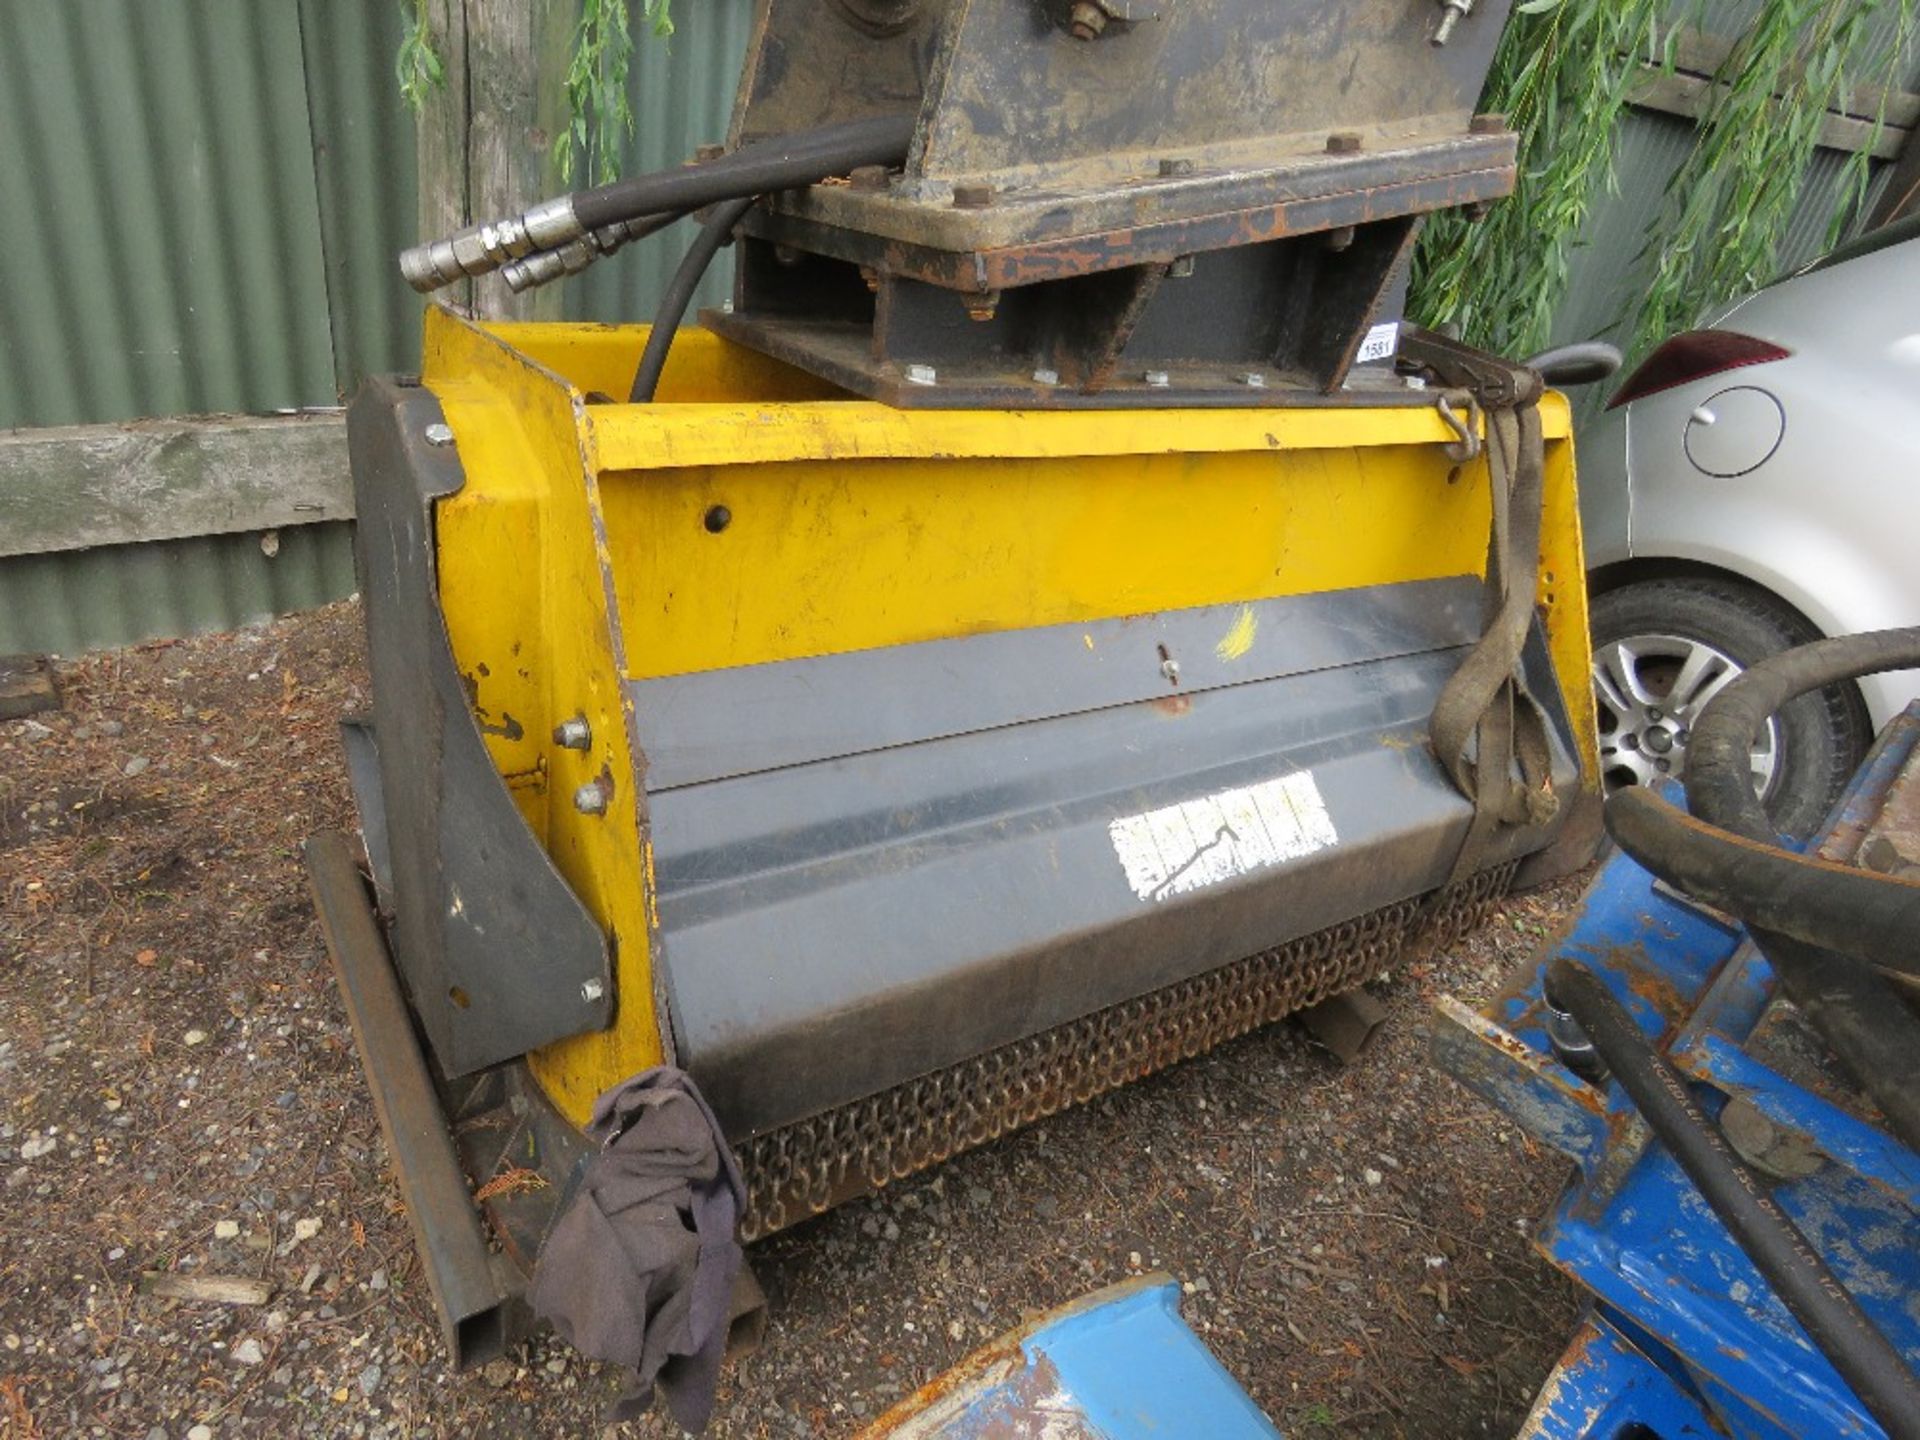 FEMAC EXCAVATOR MOUNTED HEAVY DUTY FLAIL HEAD ON 80MM PINS. UNTESTED, CONDITION UNKNOWN.